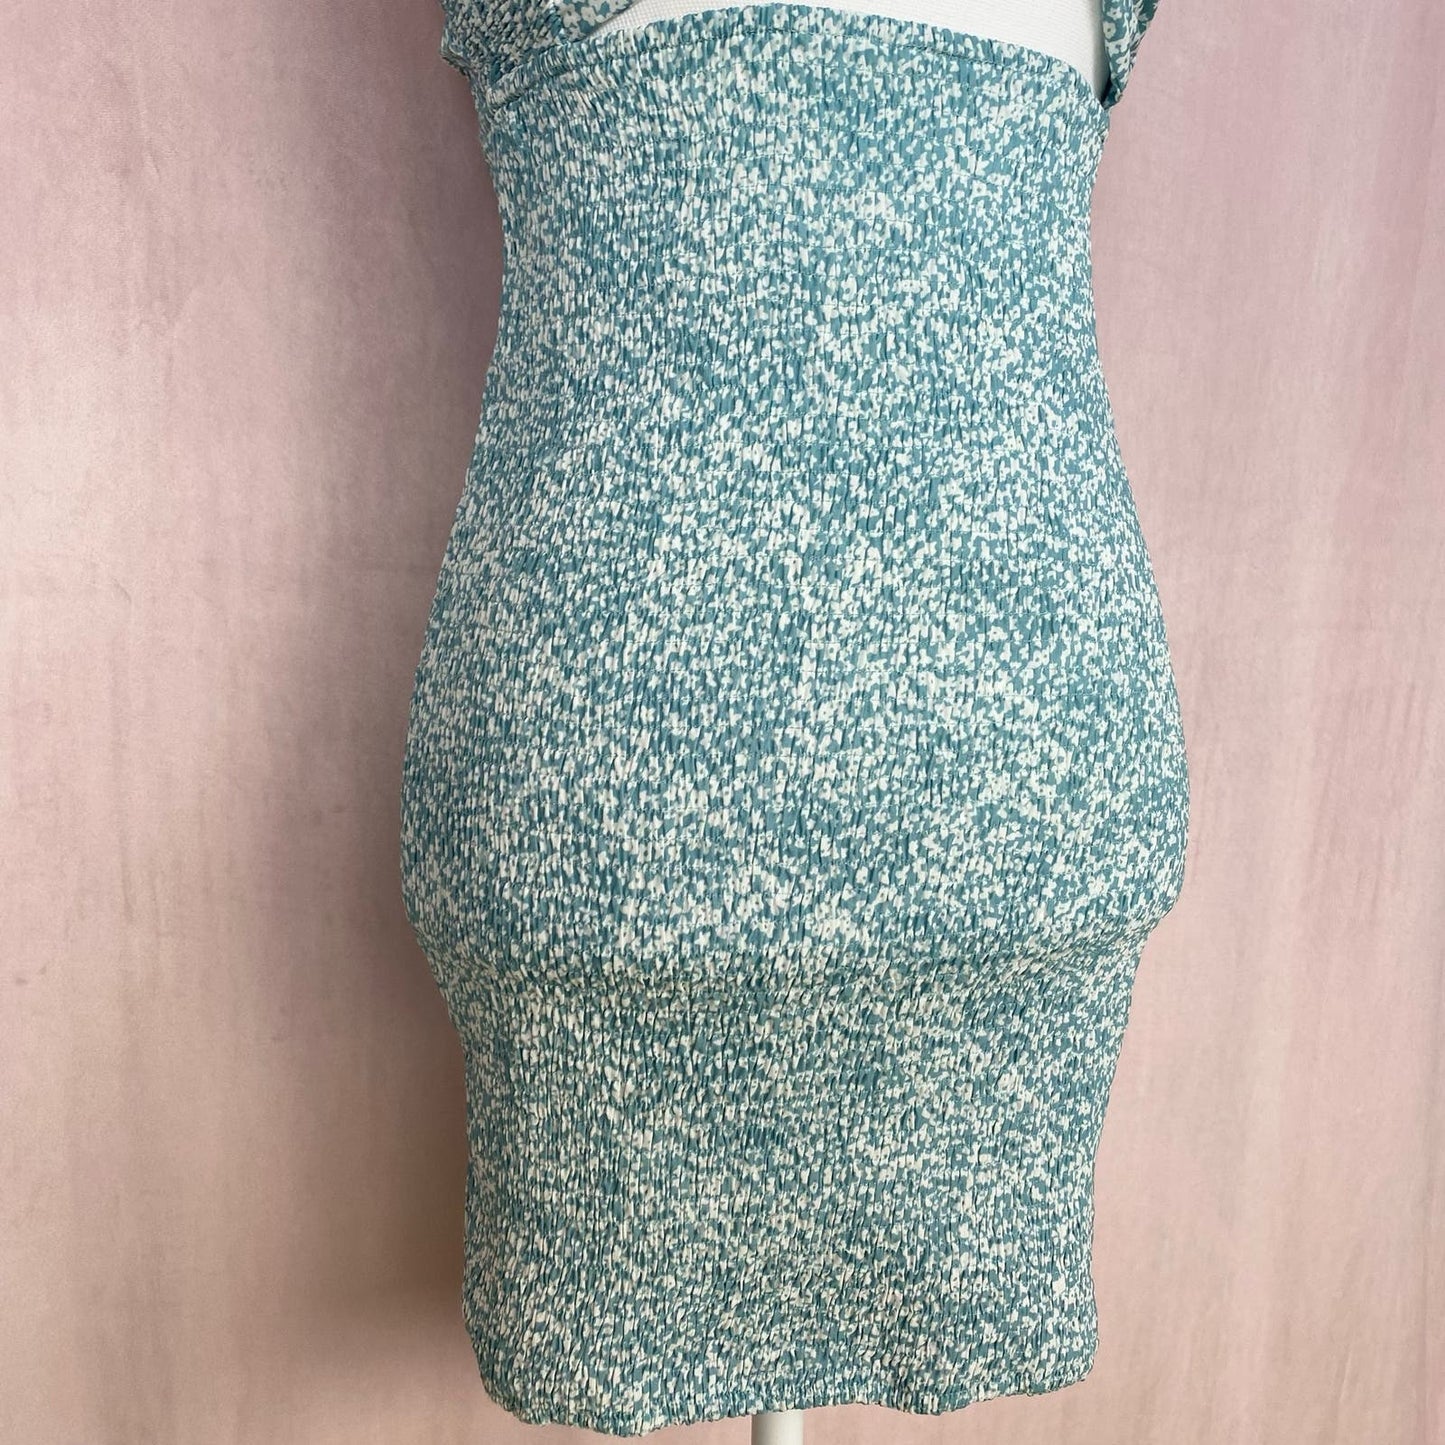 Secondhand O. Vianca Strapless Floral Tie Front Smocked Mini Dress, Size Small